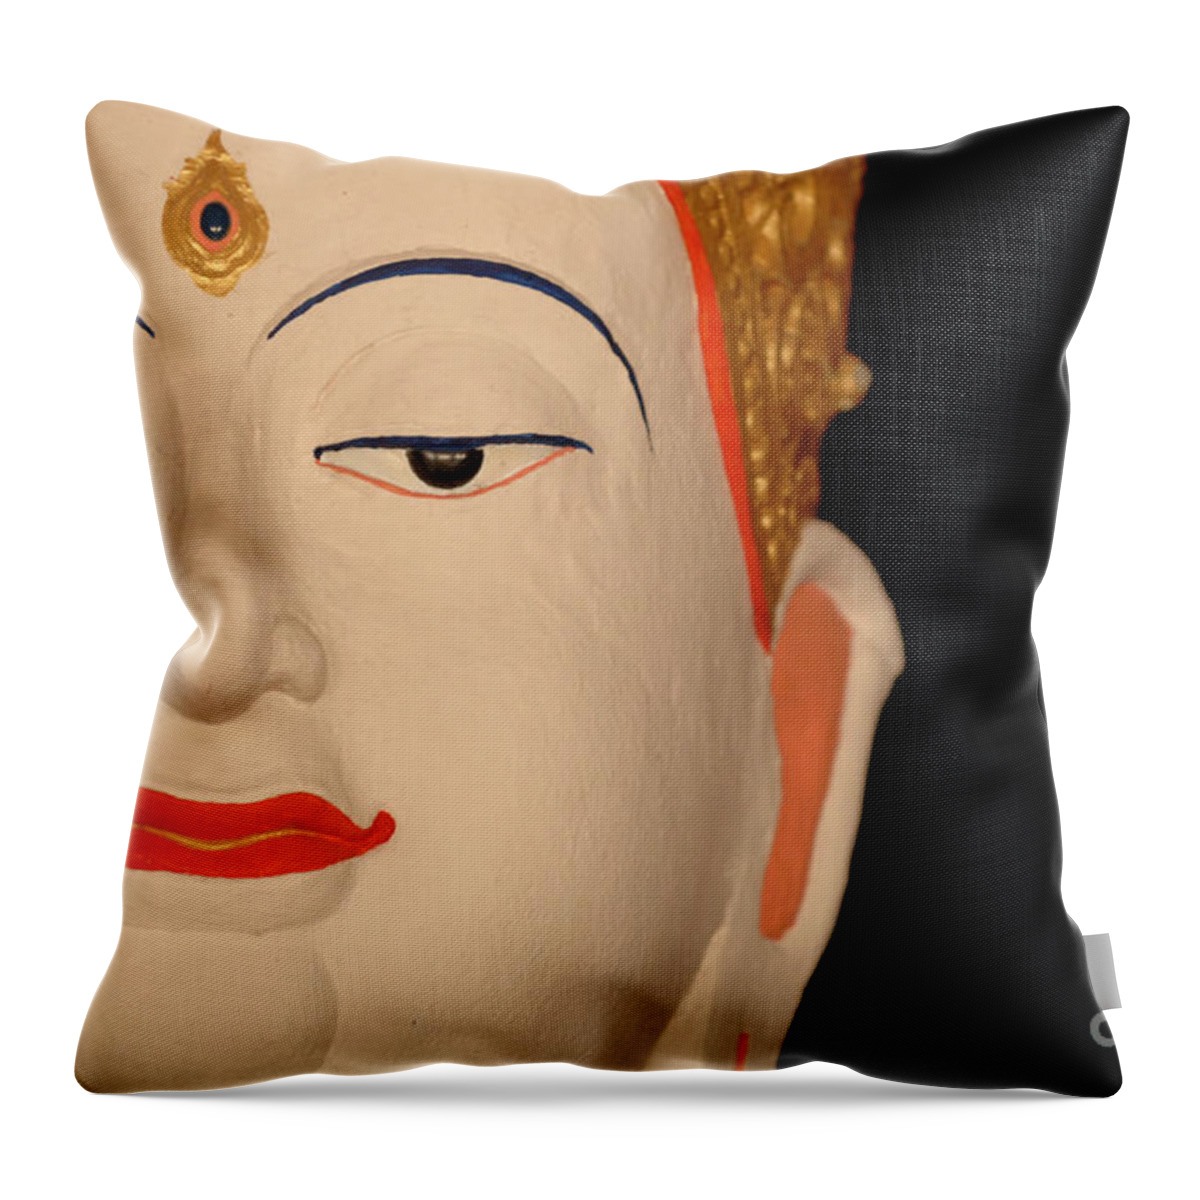  Buddha Throw Pillow featuring the photograph White Buddha Face by Bob Christopher